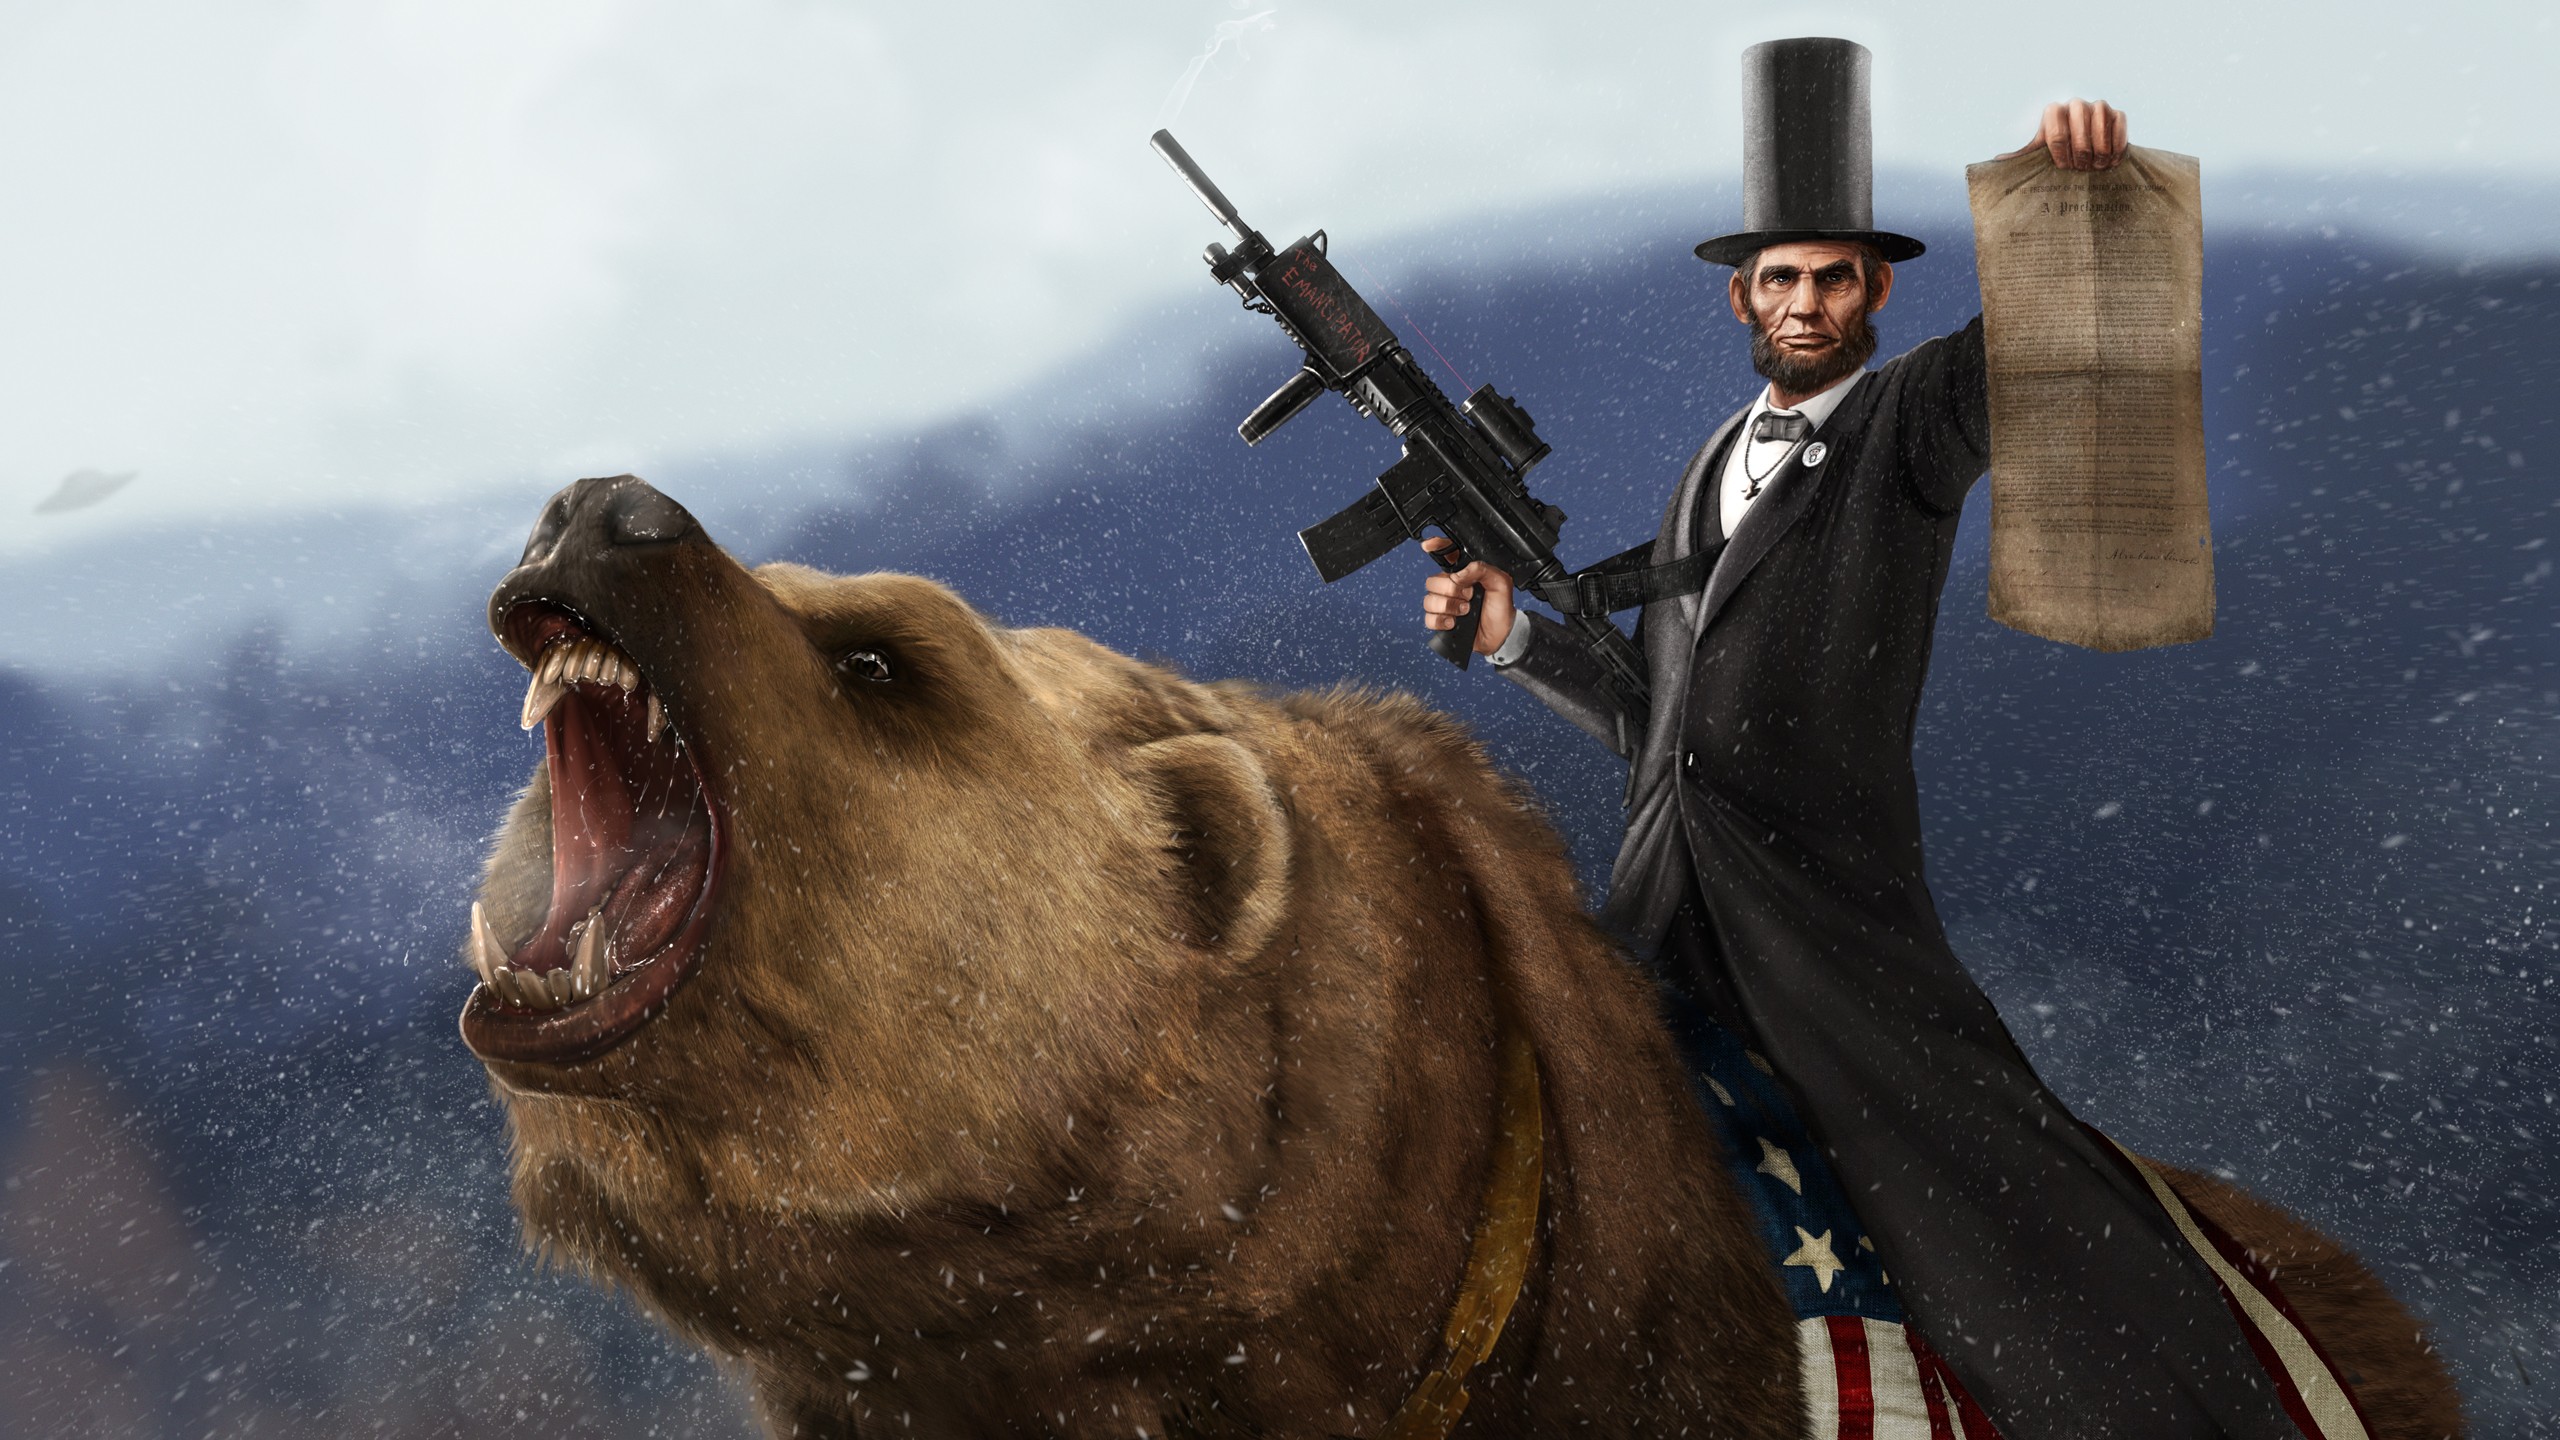 Bears Abraham Lincoln Weapon Presidents 2560x1440